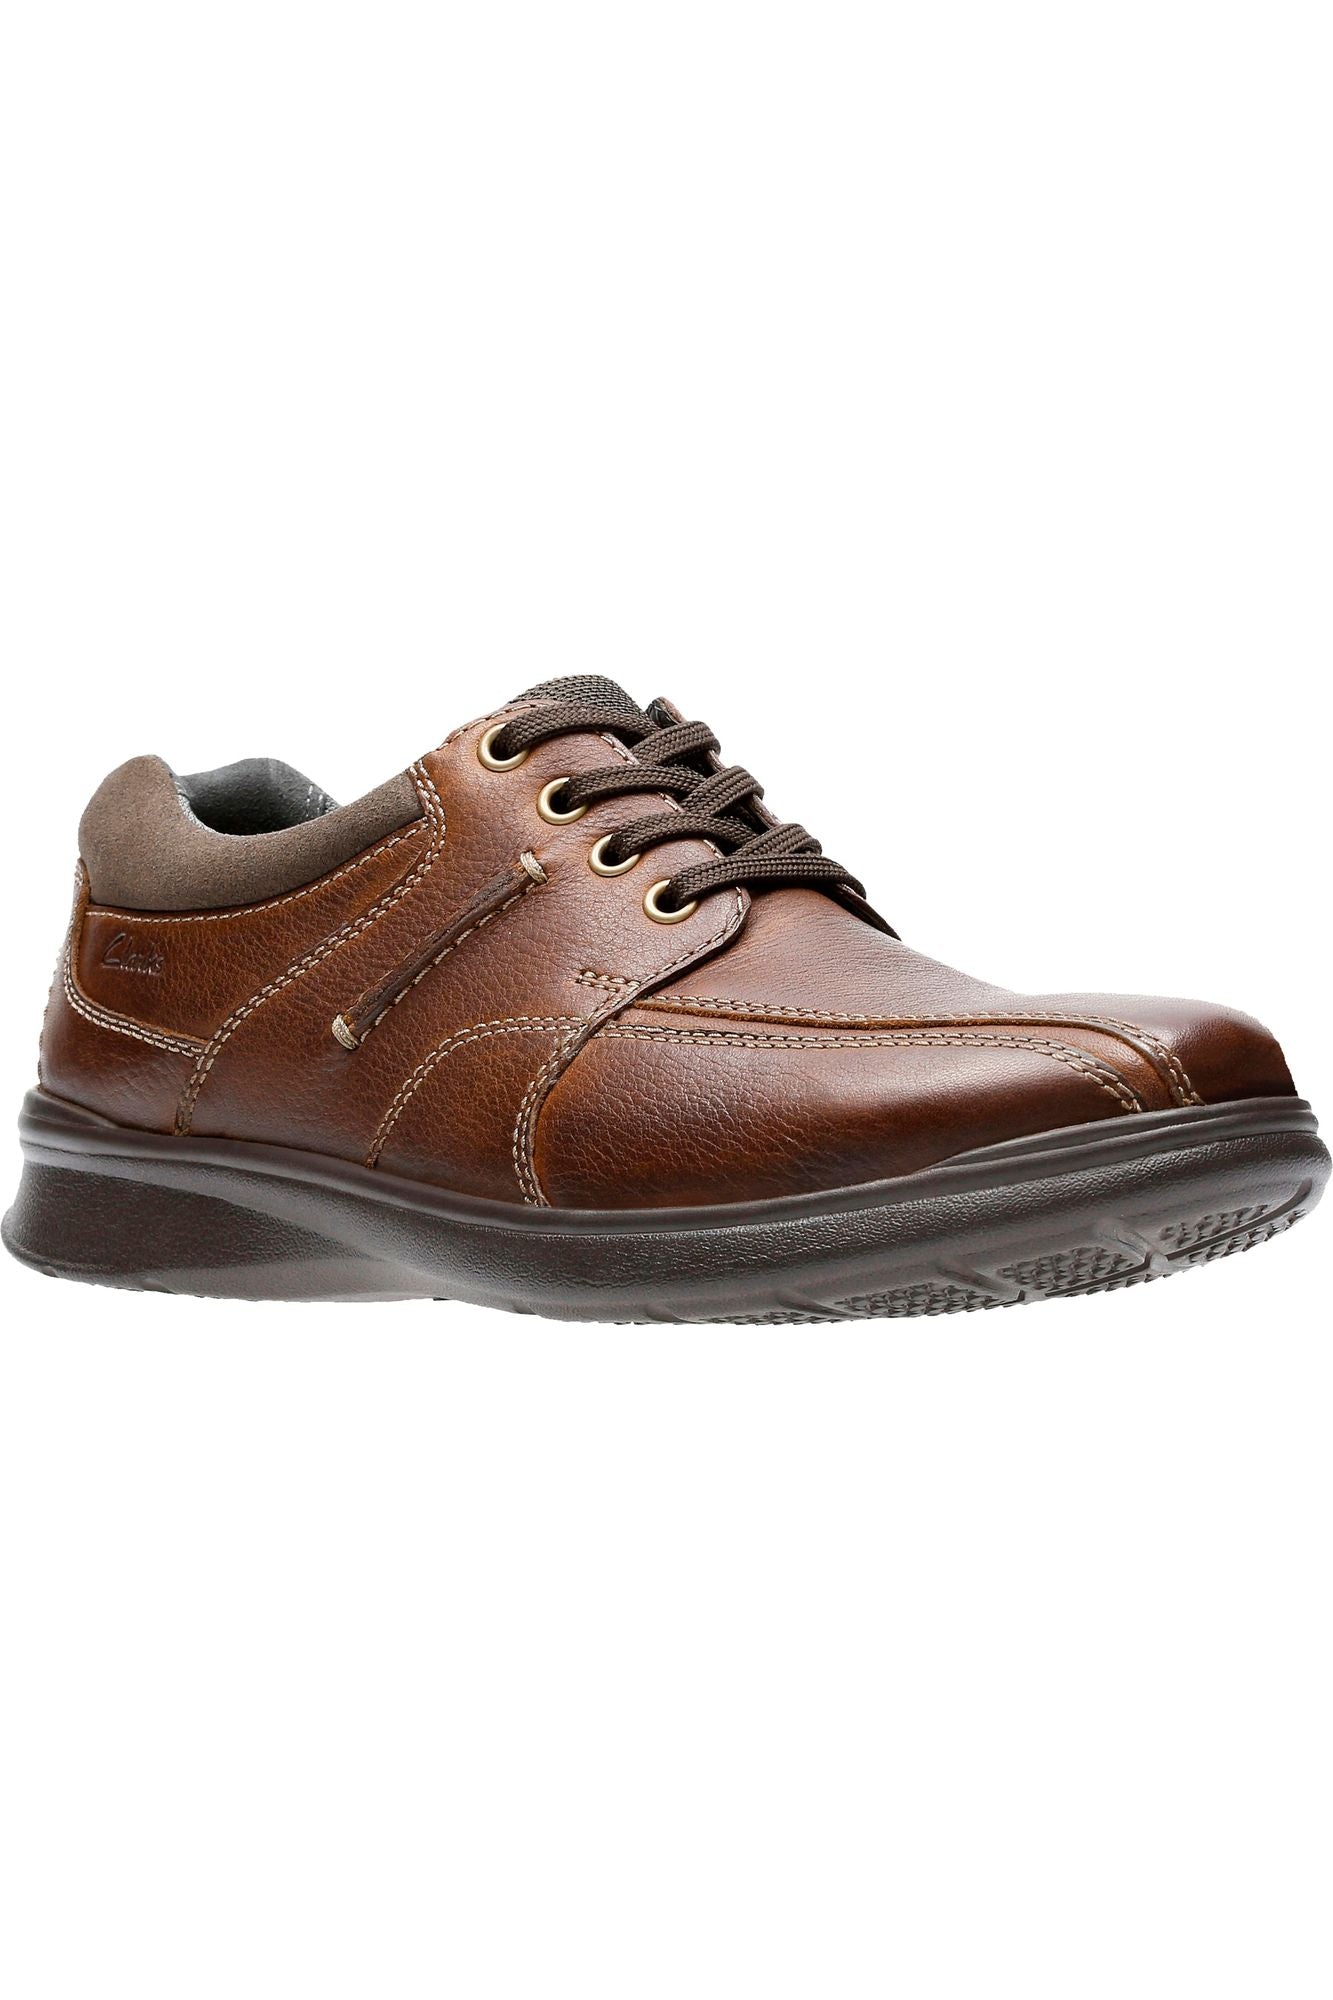 Clarks Cotrell Walk in Tobacco mens lace up shoe